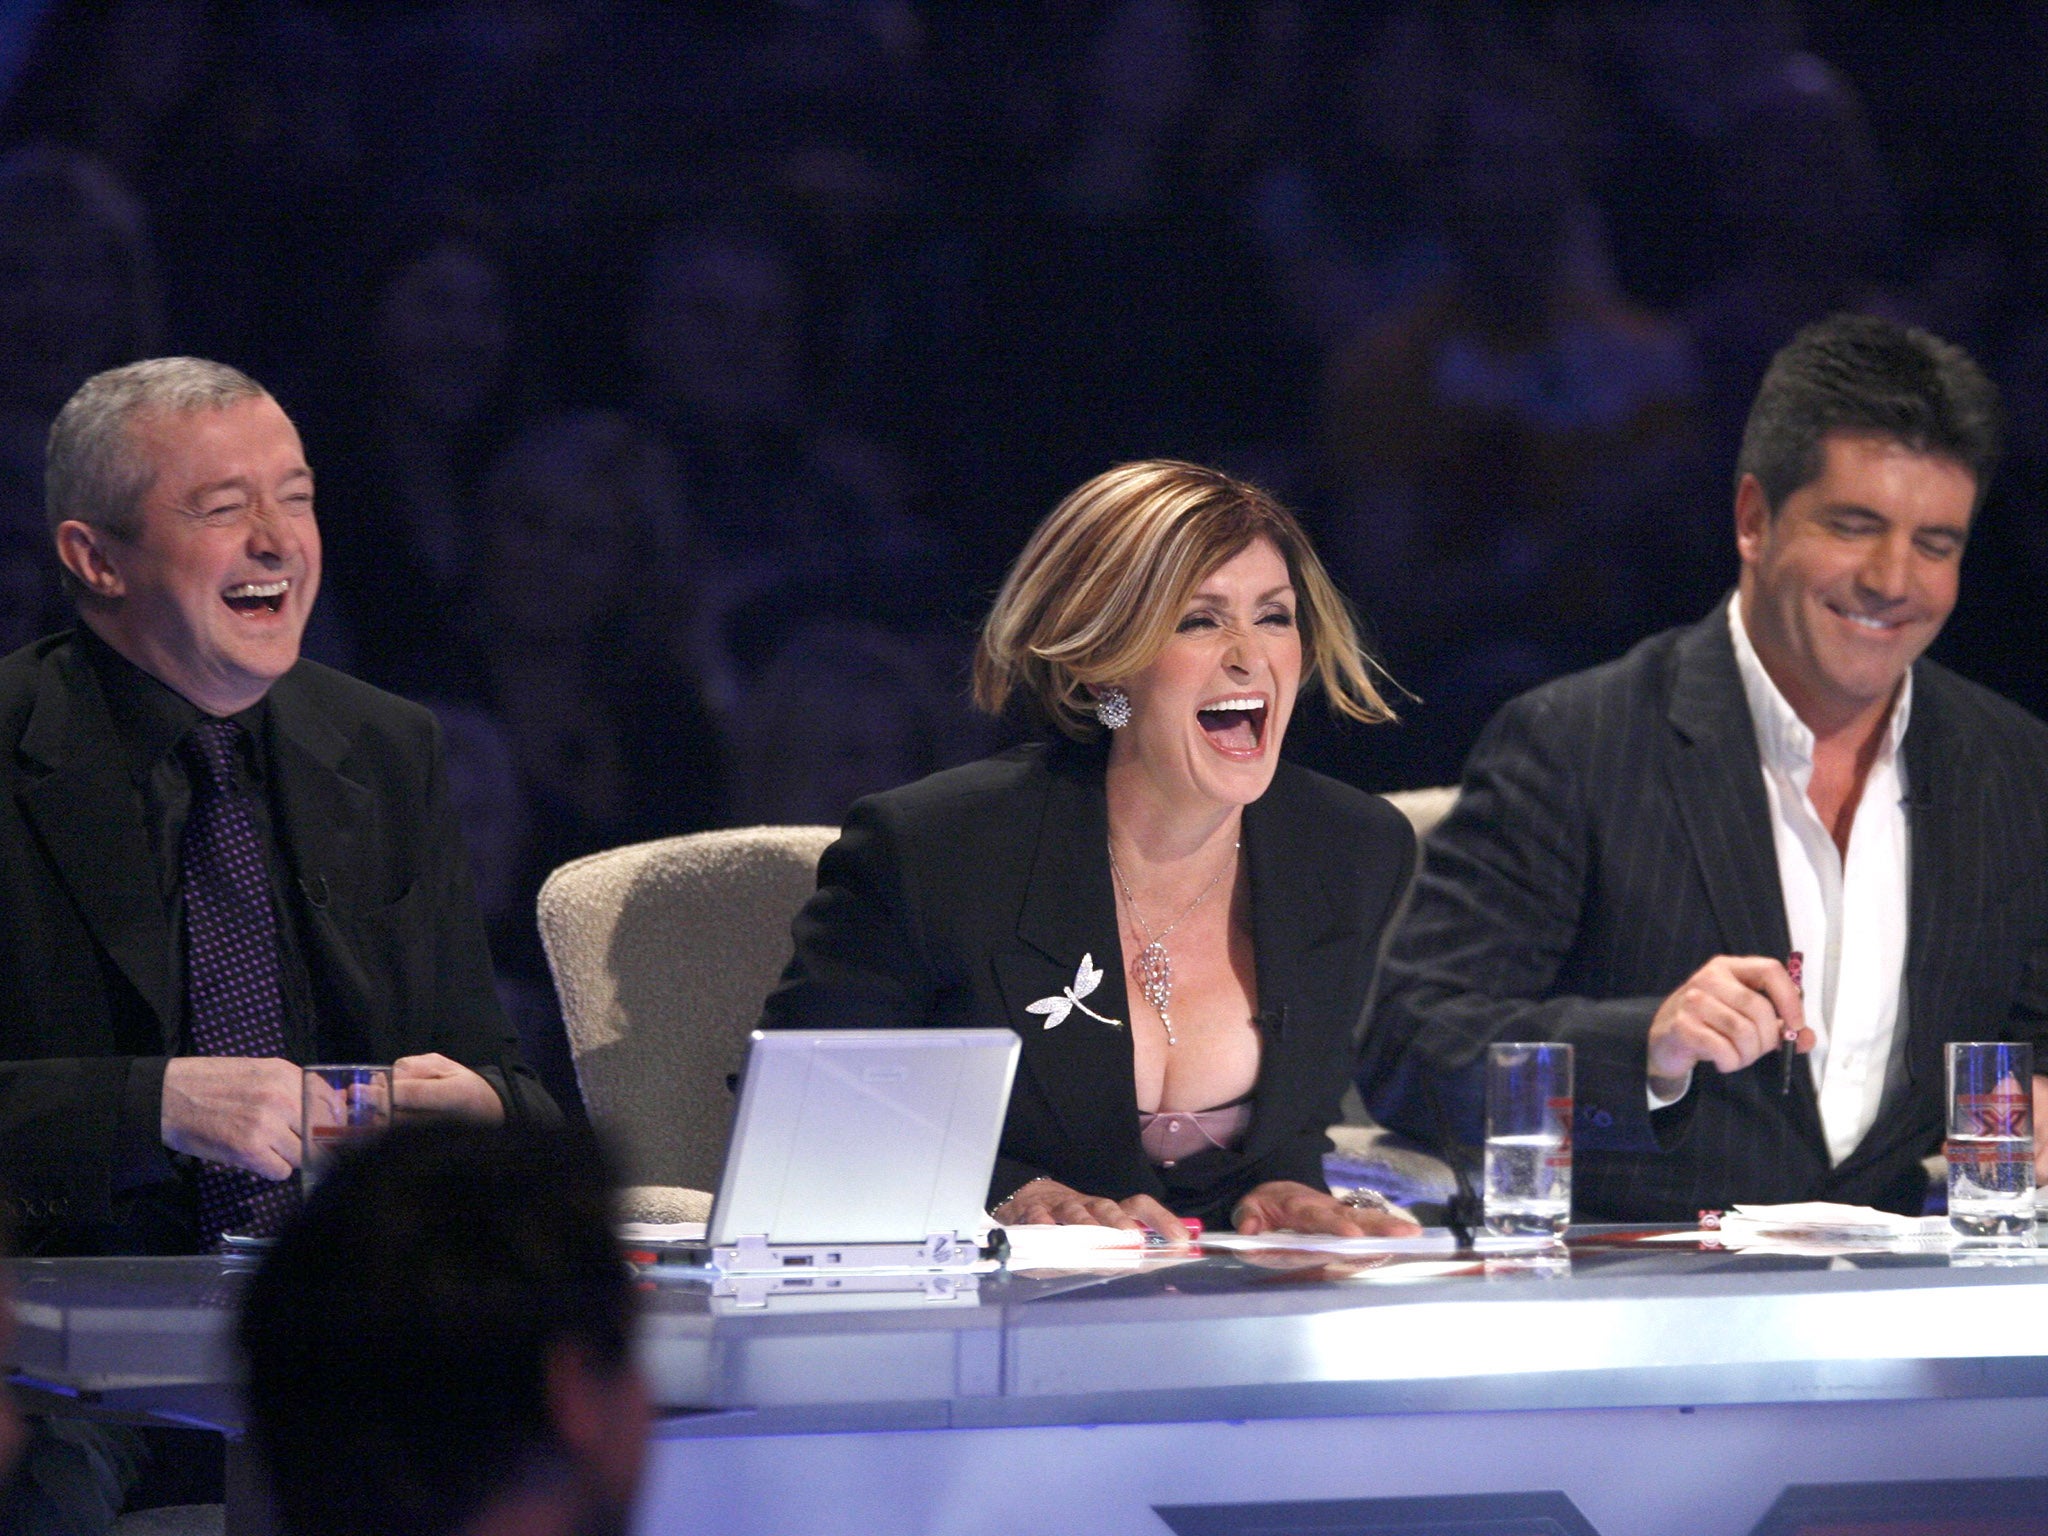 Louis Walsh, Sharon Osbourne and Simon Cowell at the judges’ table on ‘The X Factor’ in 2005